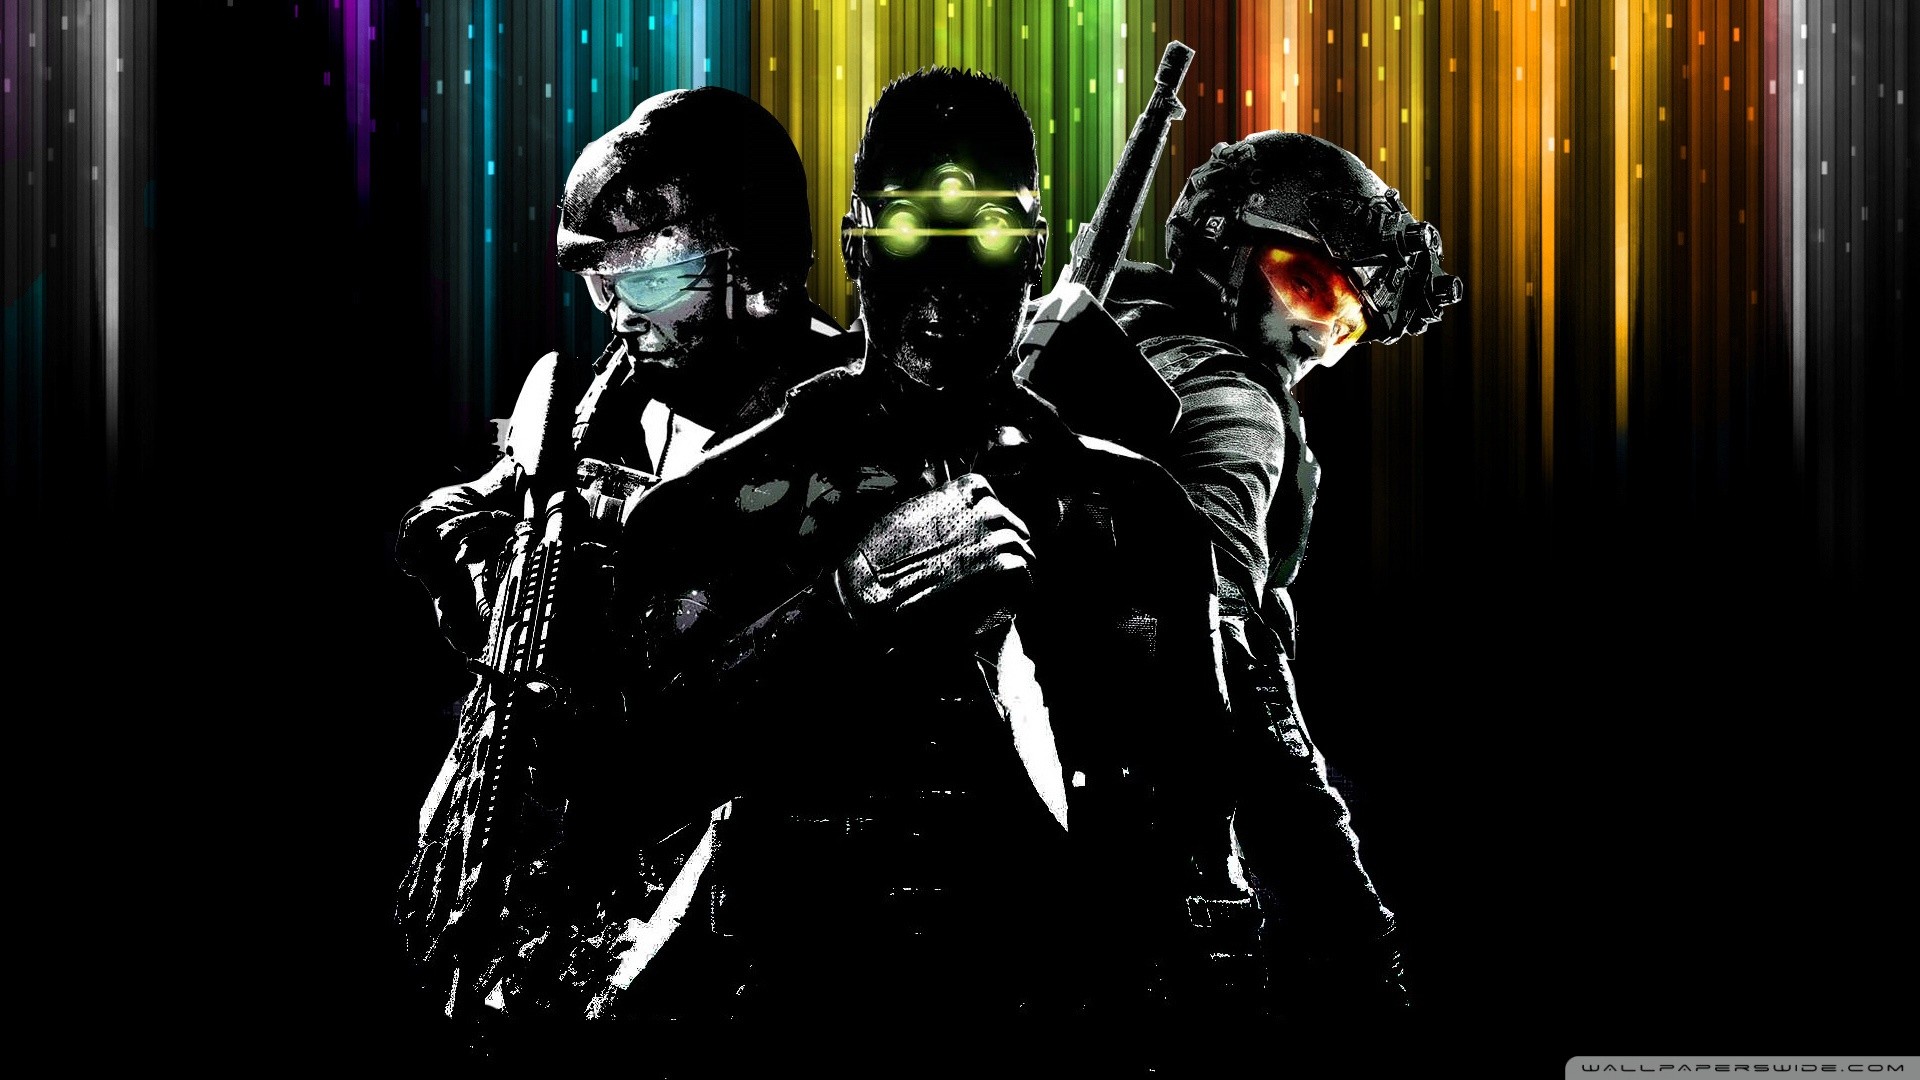 General 1920x1080 Tom Clancy's Ghost Recon video games Tom Clancy's Tom Clancy's Splinter Cell Rainbow Six PC gaming